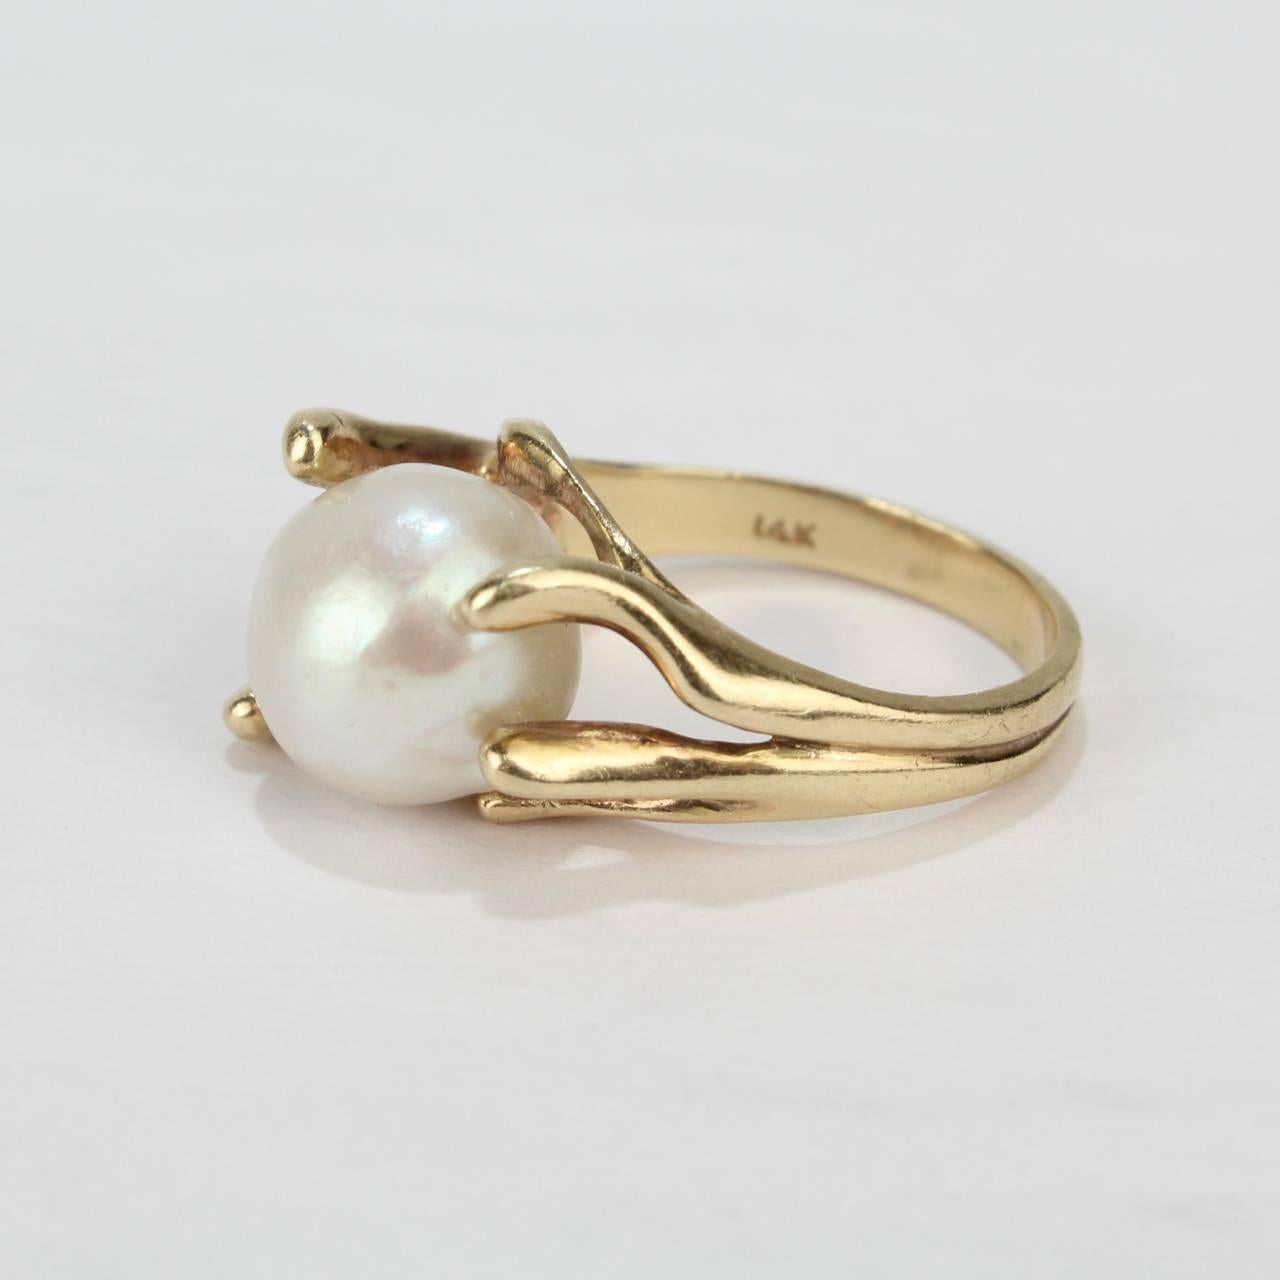 A fine, modernist 14k yellow gold and baroque pearl cocktail ring from the mid-20th century.

Features a large baroque pearl in an organic, pronged setting.

Interior of shank stamped: 14K 

Overall Width: ca. 3/4 in.
Ring size: 6 1/4 
Pearl size: 